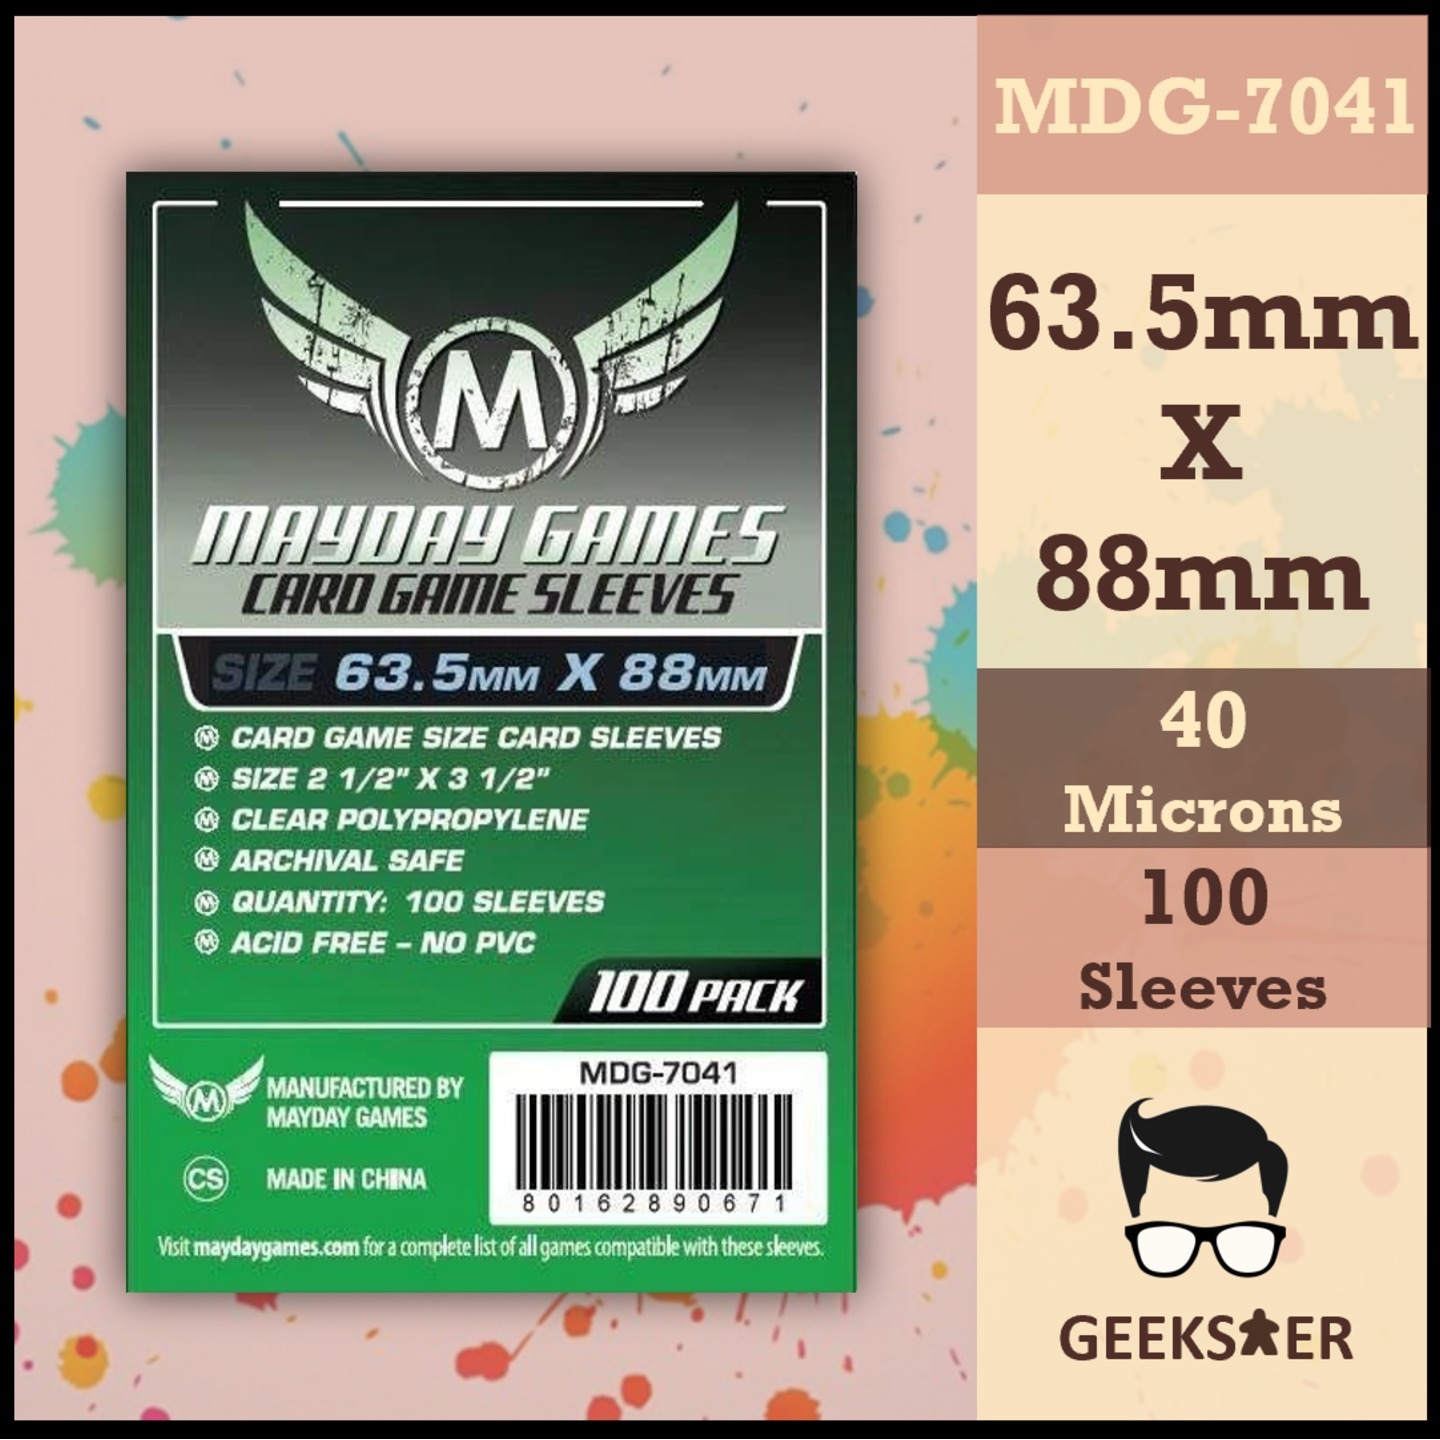 7041 Mayday Standard Card Size 63.5 X 88mm